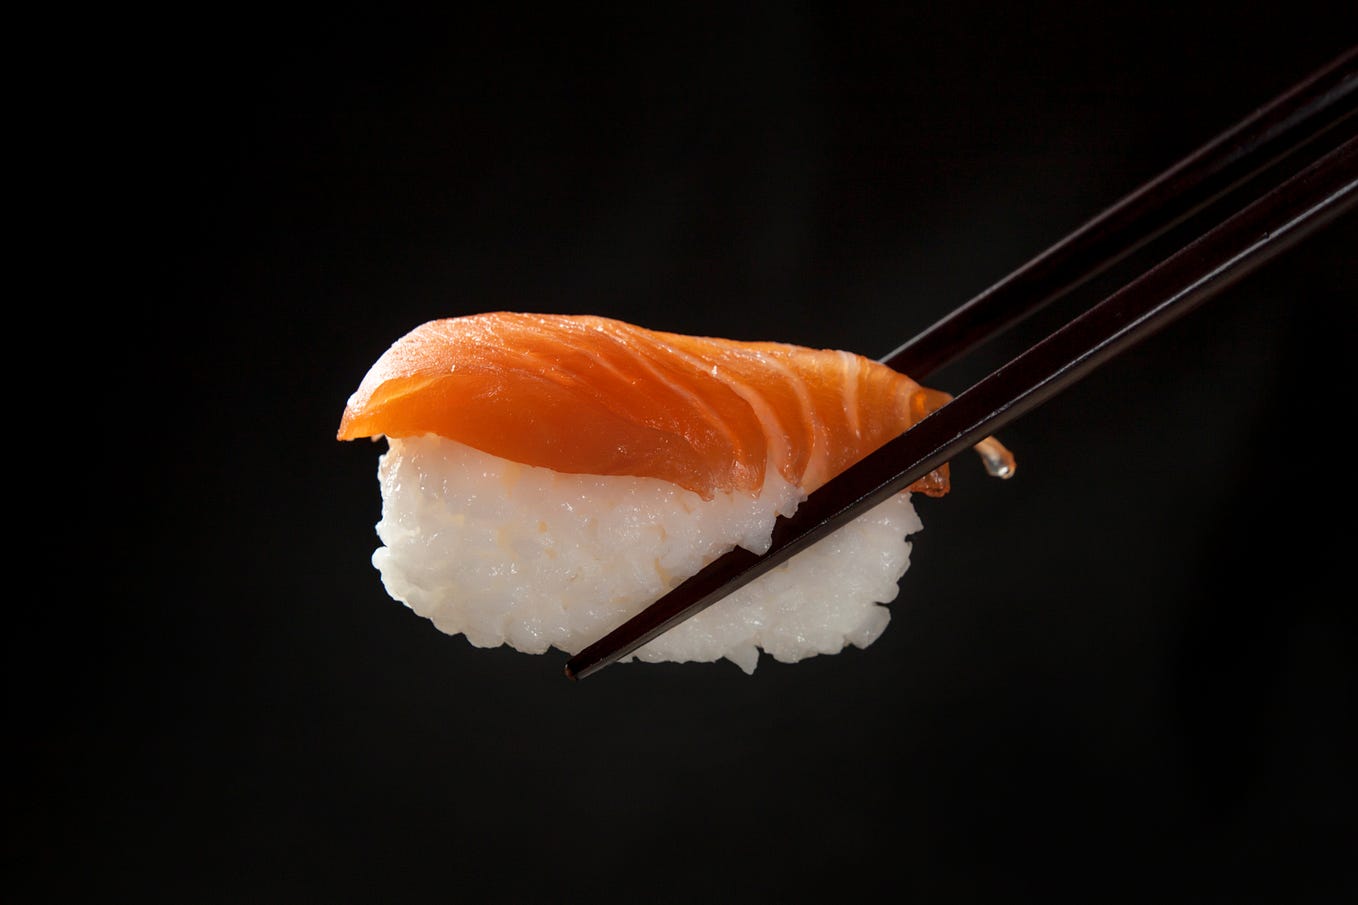 How Norway Convinced Japan That Sushi Was Made With Salmon